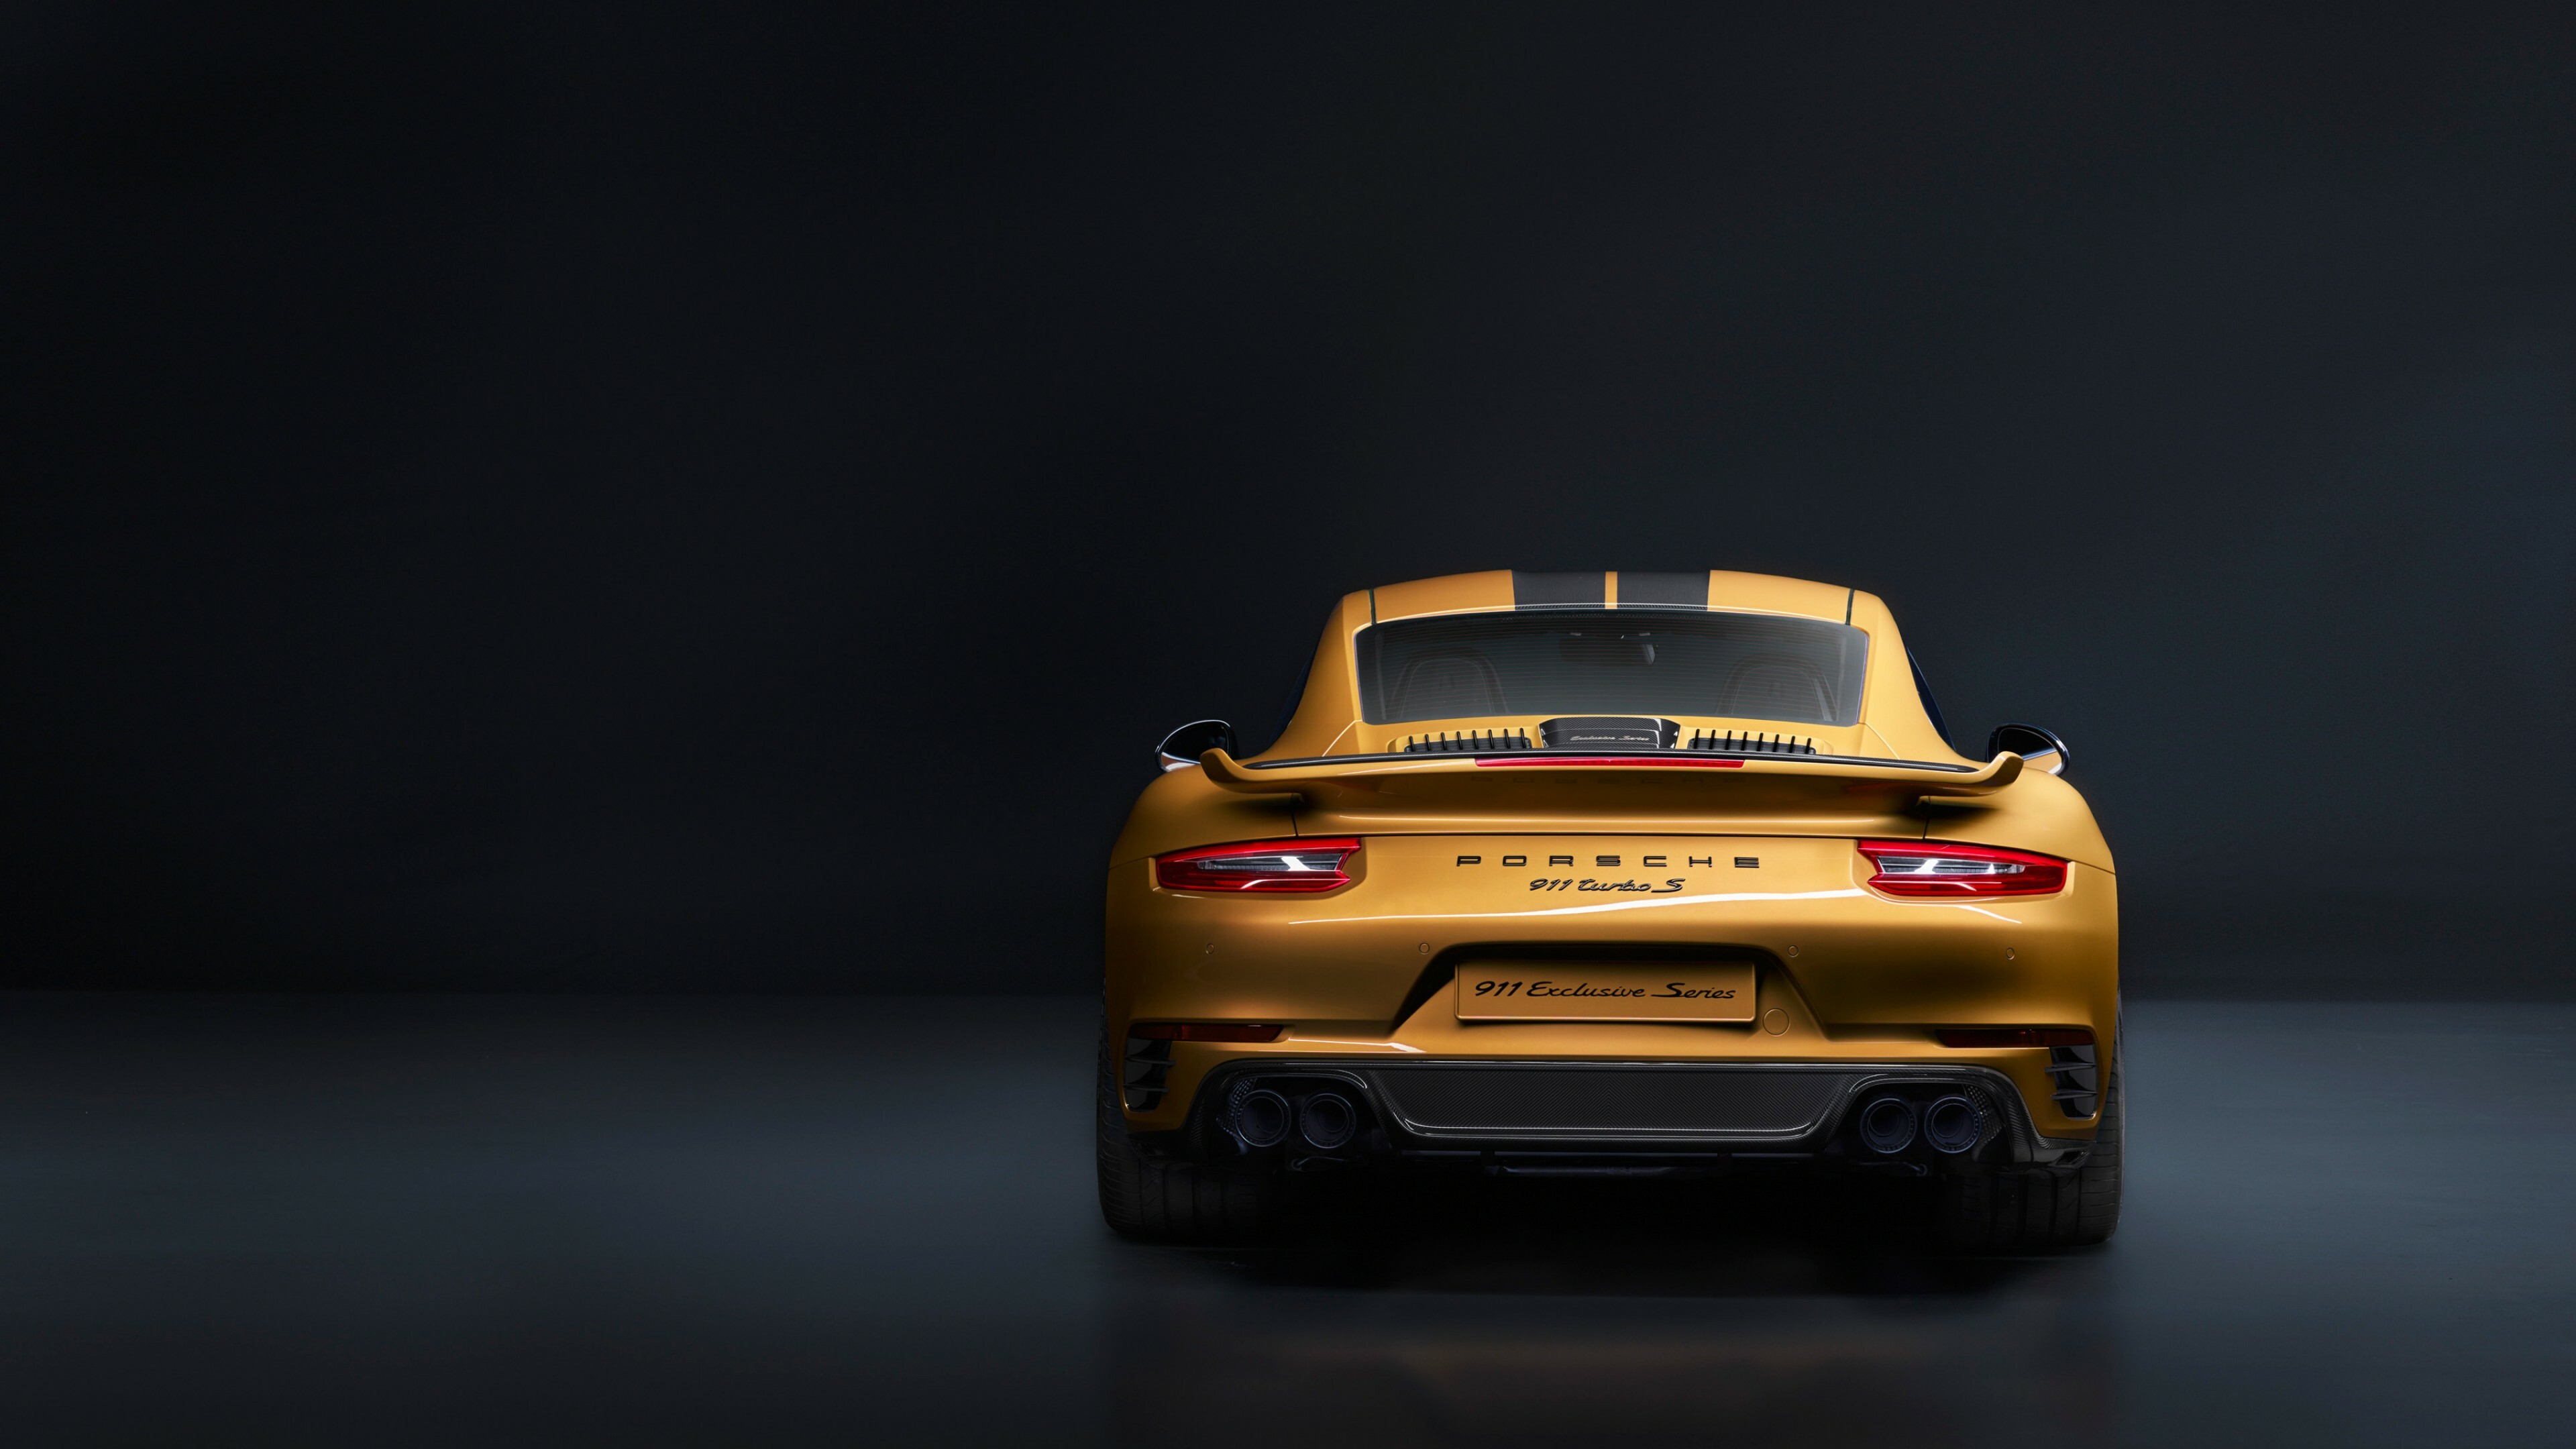 Porsche 911: Turbo S Exclusive Series, Production of the model began in September 1964. 3840x2160 4K Background.